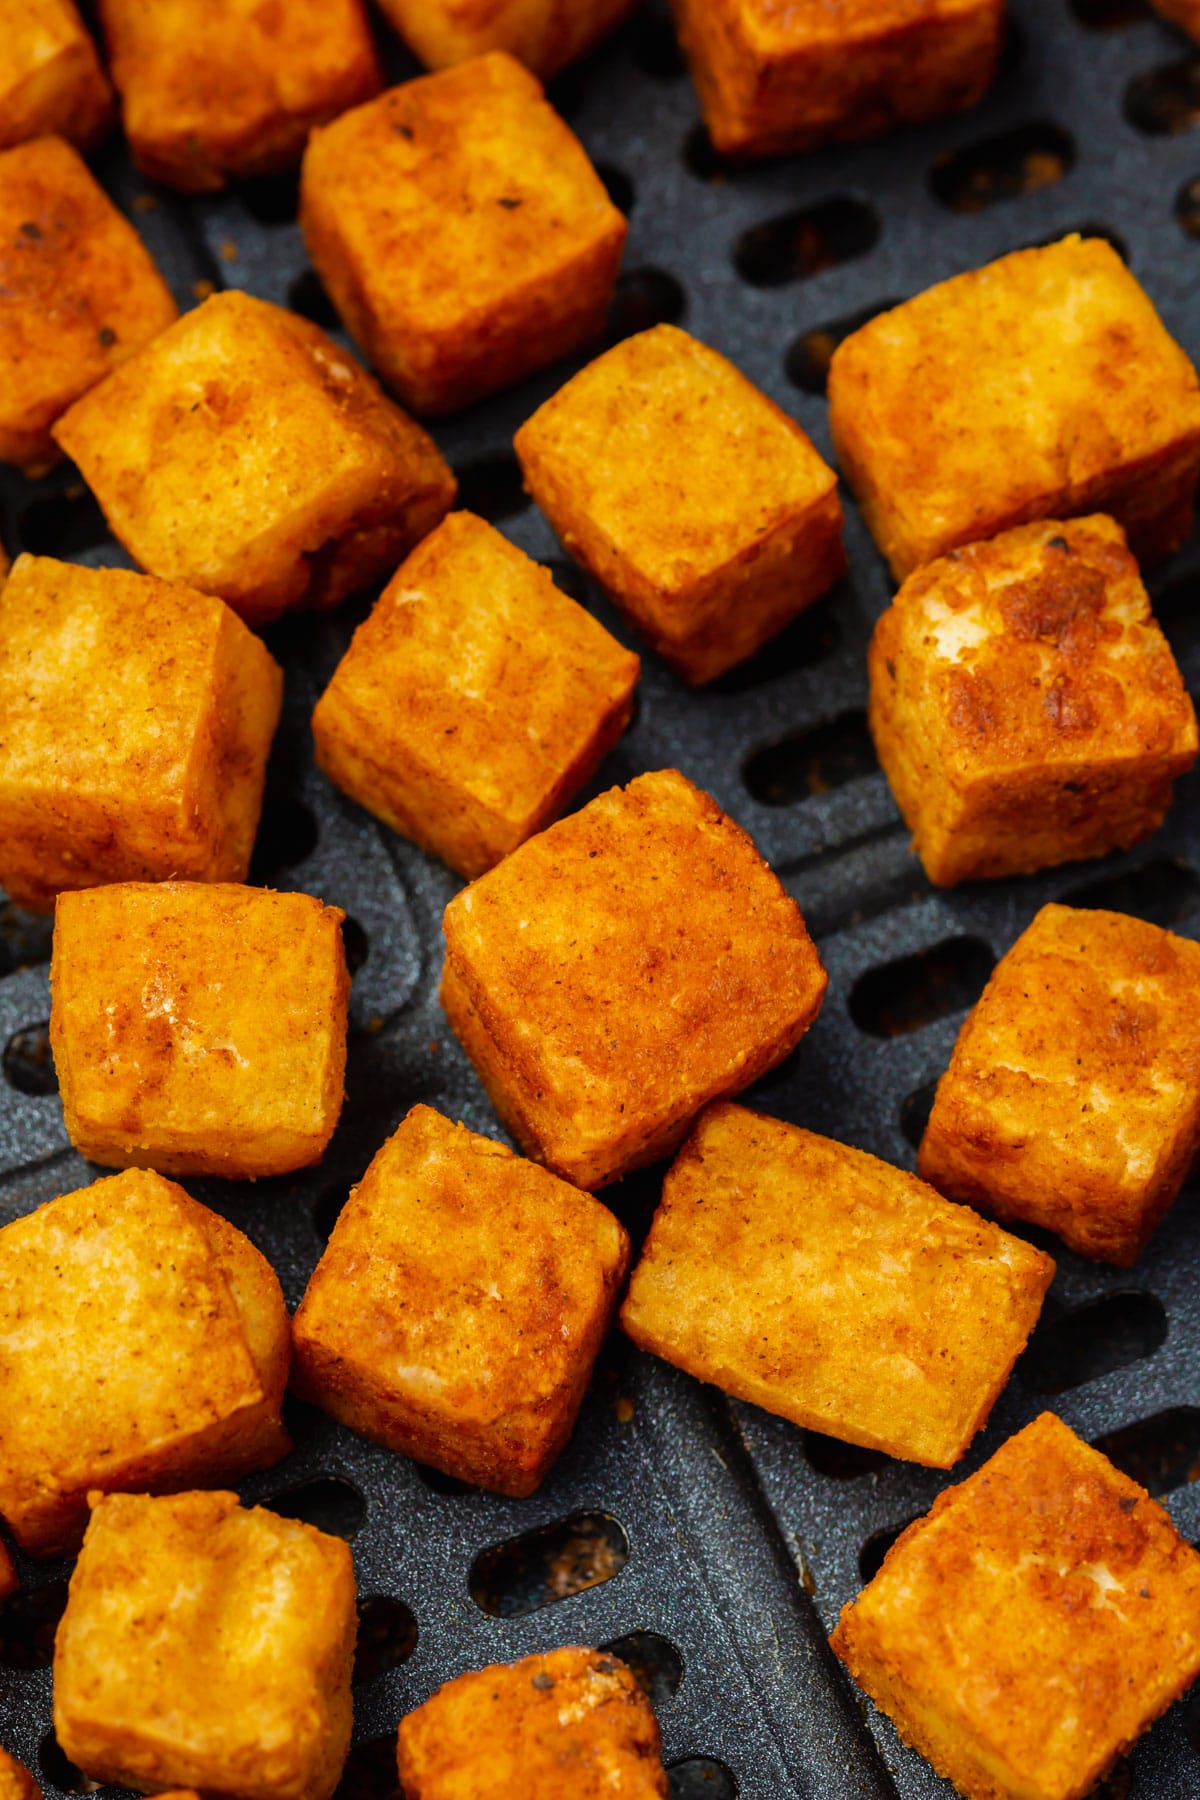 Learn how to air fry raw tofu in 6 easy steps! Turn raw tofu into crispy delicious tofu in your air fryer!